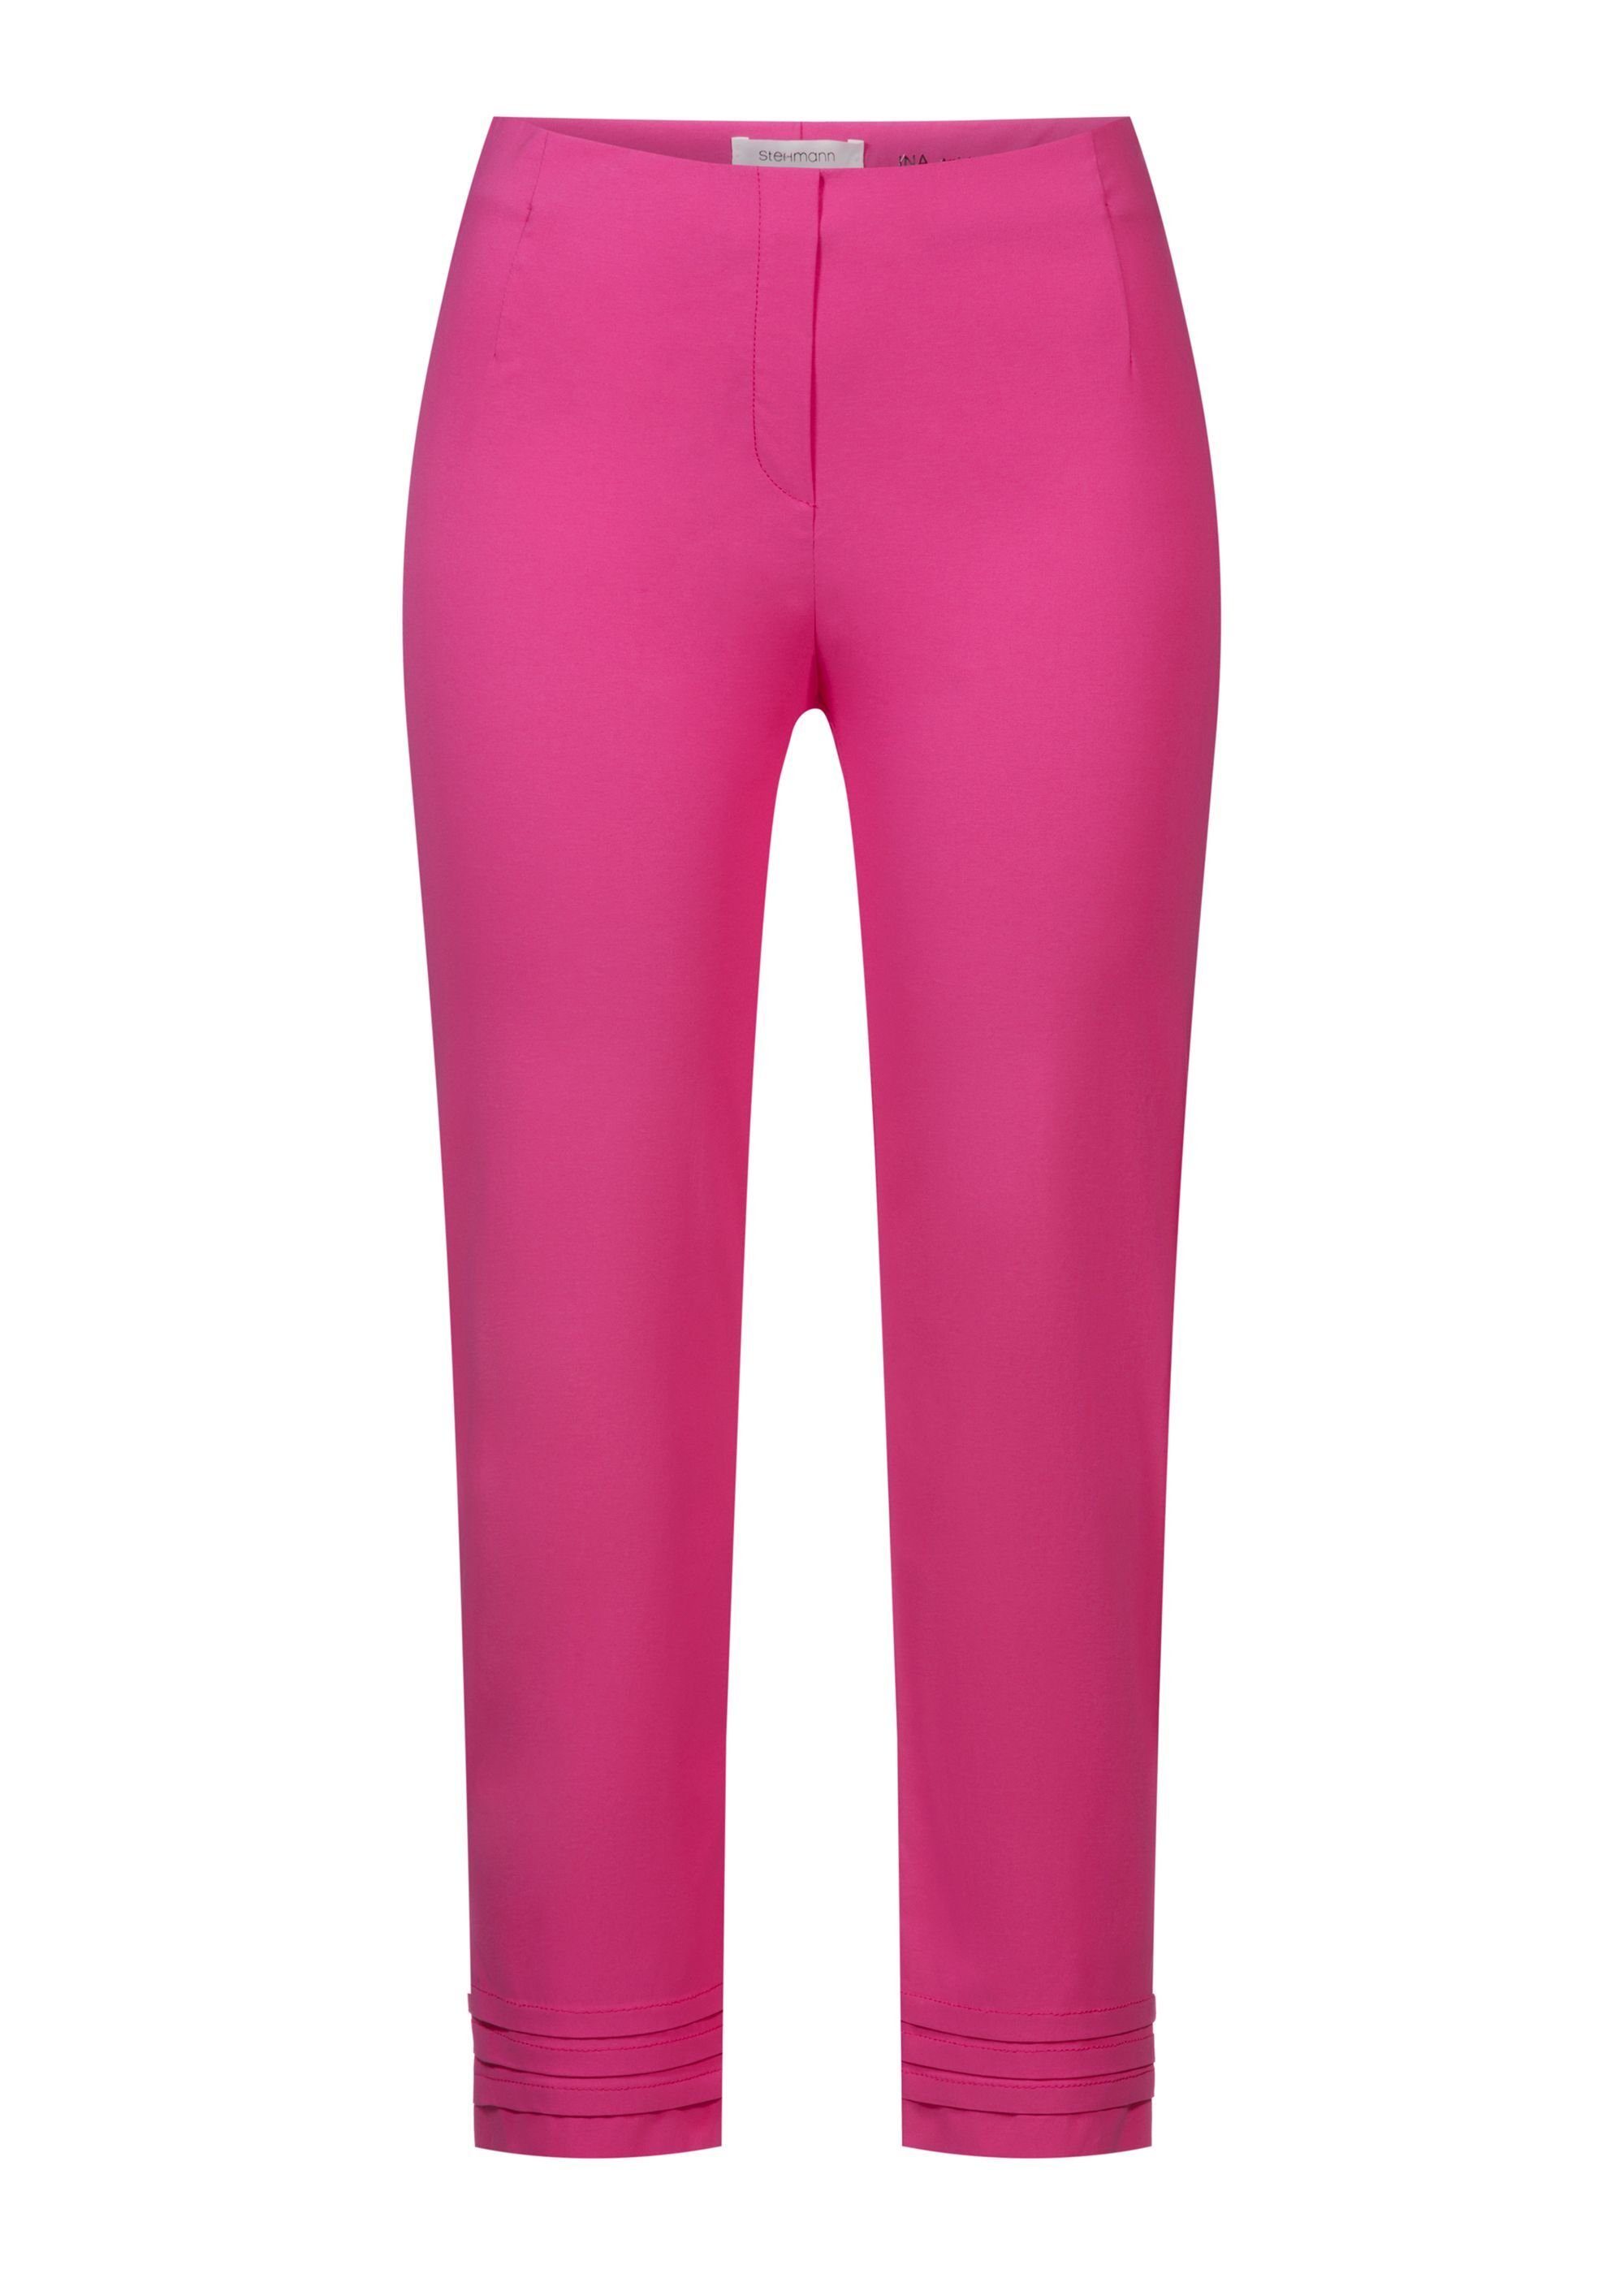 fluo Stoffhose Stehmann fuxia Ina mit Faltendetails